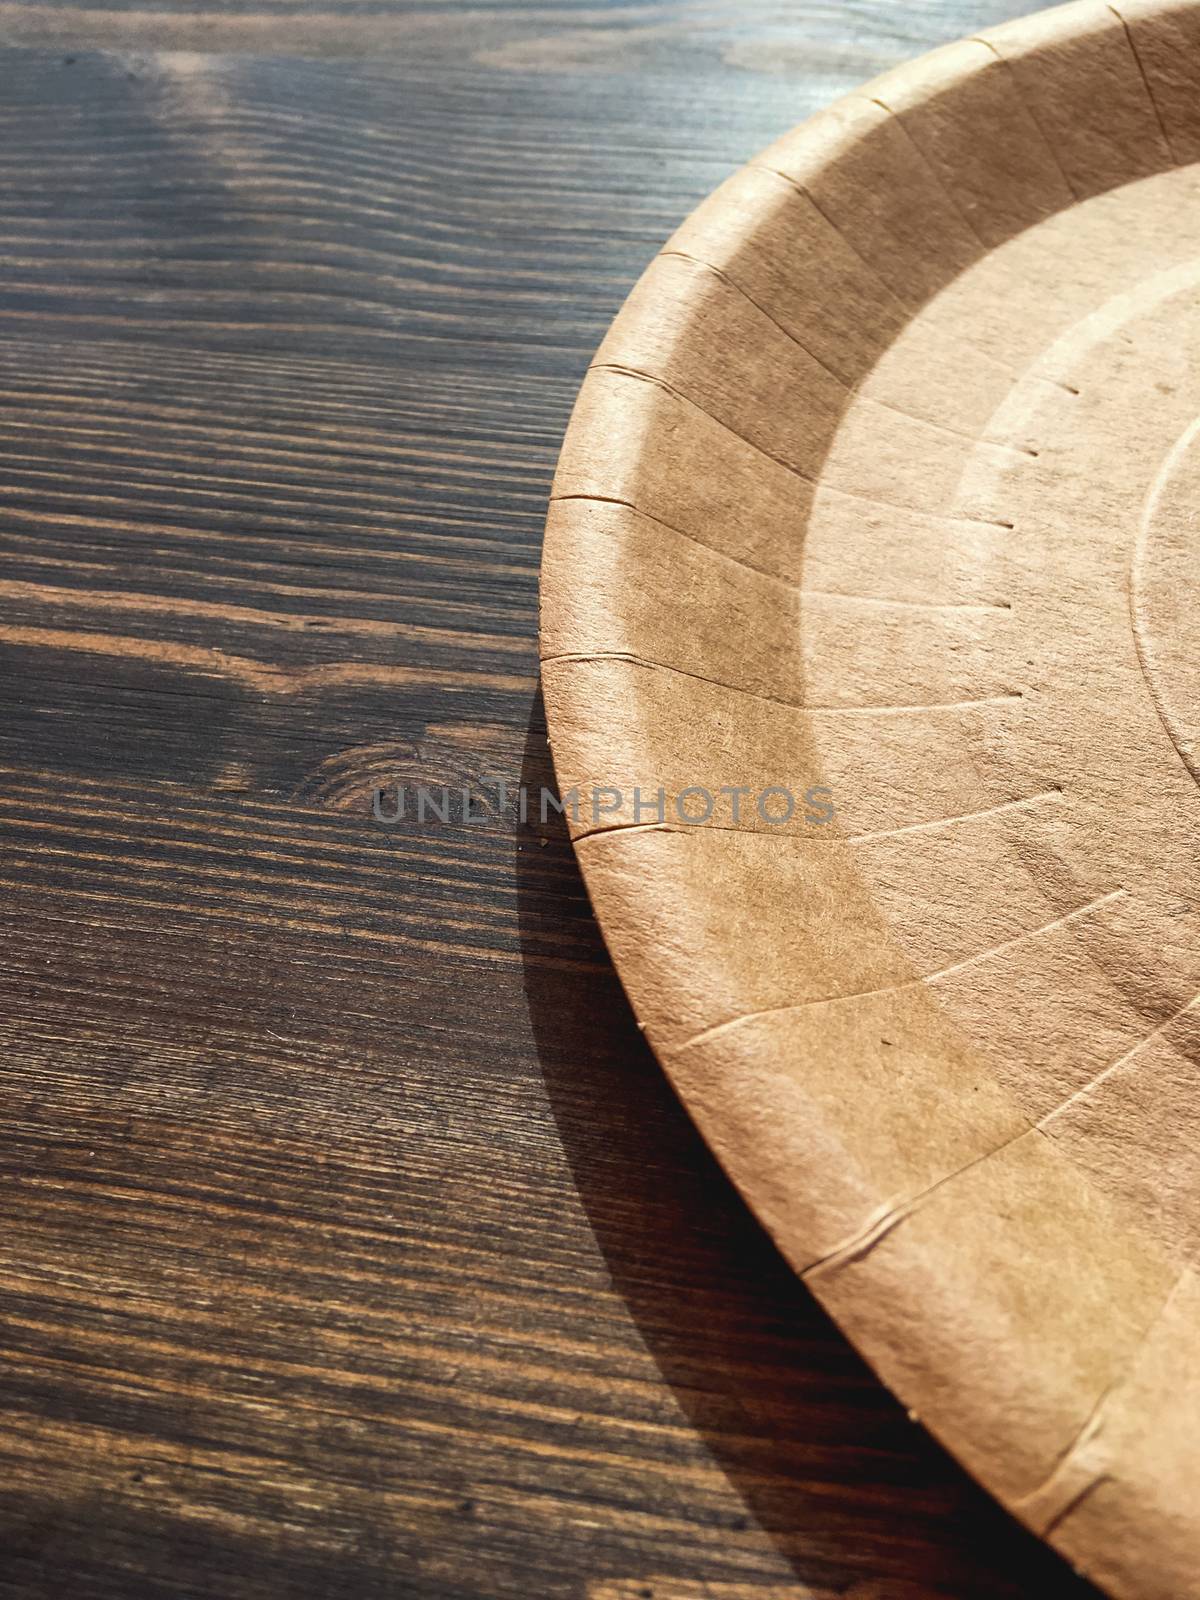 Disposable tableware on wooden table in cafe. Round cardboard plate.